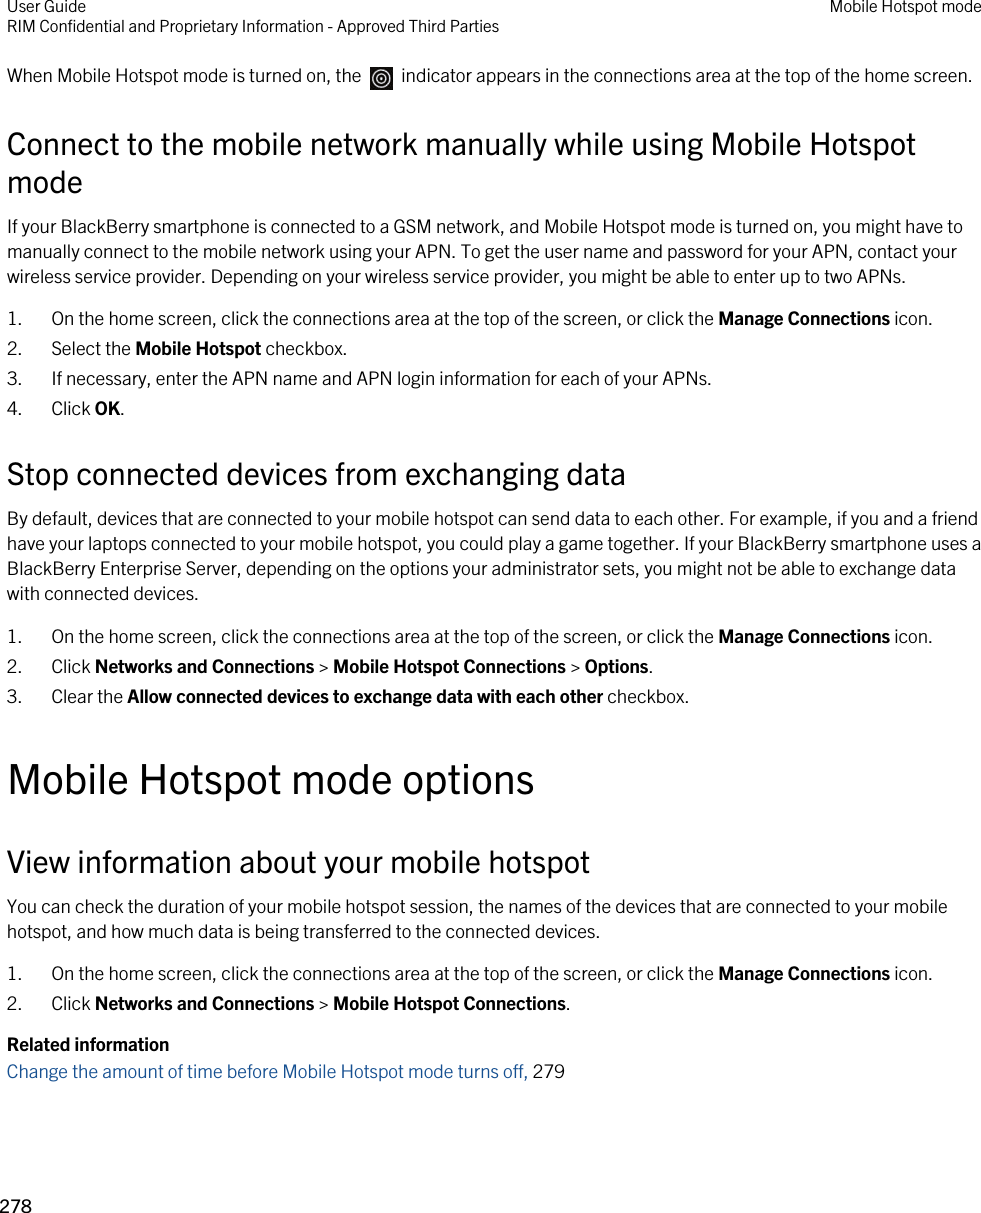 When Mobile Hotspot mode is turned on, the    indicator appears in the connections area at the top of the home screen.Connect to the mobile network manually while using Mobile Hotspot modeIf your BlackBerry smartphone is connected to a GSM network, and Mobile Hotspot mode is turned on, you might have to manually connect to the mobile network using your APN. To get the user name and password for your APN, contact your wireless service provider. Depending on your wireless service provider, you might be able to enter up to two APNs.1. On the home screen, click the connections area at the top of the screen, or click the Manage Connections icon.2. Select the Mobile Hotspot checkbox.3. If necessary, enter the APN name and APN login information for each of your APNs.4. Click OK.Stop connected devices from exchanging dataBy default, devices that are connected to your mobile hotspot can send data to each other. For example, if you and a friend have your laptops connected to your mobile hotspot, you could play a game together. If your BlackBerry smartphone uses a BlackBerry Enterprise Server, depending on the options your administrator sets, you might not be able to exchange data with connected devices.1. On the home screen, click the connections area at the top of the screen, or click the Manage Connections icon.2. Click Networks and Connections &gt; Mobile Hotspot Connections &gt; Options.3. Clear the Allow connected devices to exchange data with each other checkbox.Mobile Hotspot mode optionsView information about your mobile hotspotYou can check the duration of your mobile hotspot session, the names of the devices that are connected to your mobile hotspot, and how much data is being transferred to the connected devices.1. On the home screen, click the connections area at the top of the screen, or click the Manage Connections icon.2. Click Networks and Connections &gt; Mobile Hotspot Connections.Related informationChange the amount of time before Mobile Hotspot mode turns off, 279User GuideRIM Confidential and Proprietary Information - Approved Third Parties Mobile Hotspot mode278 